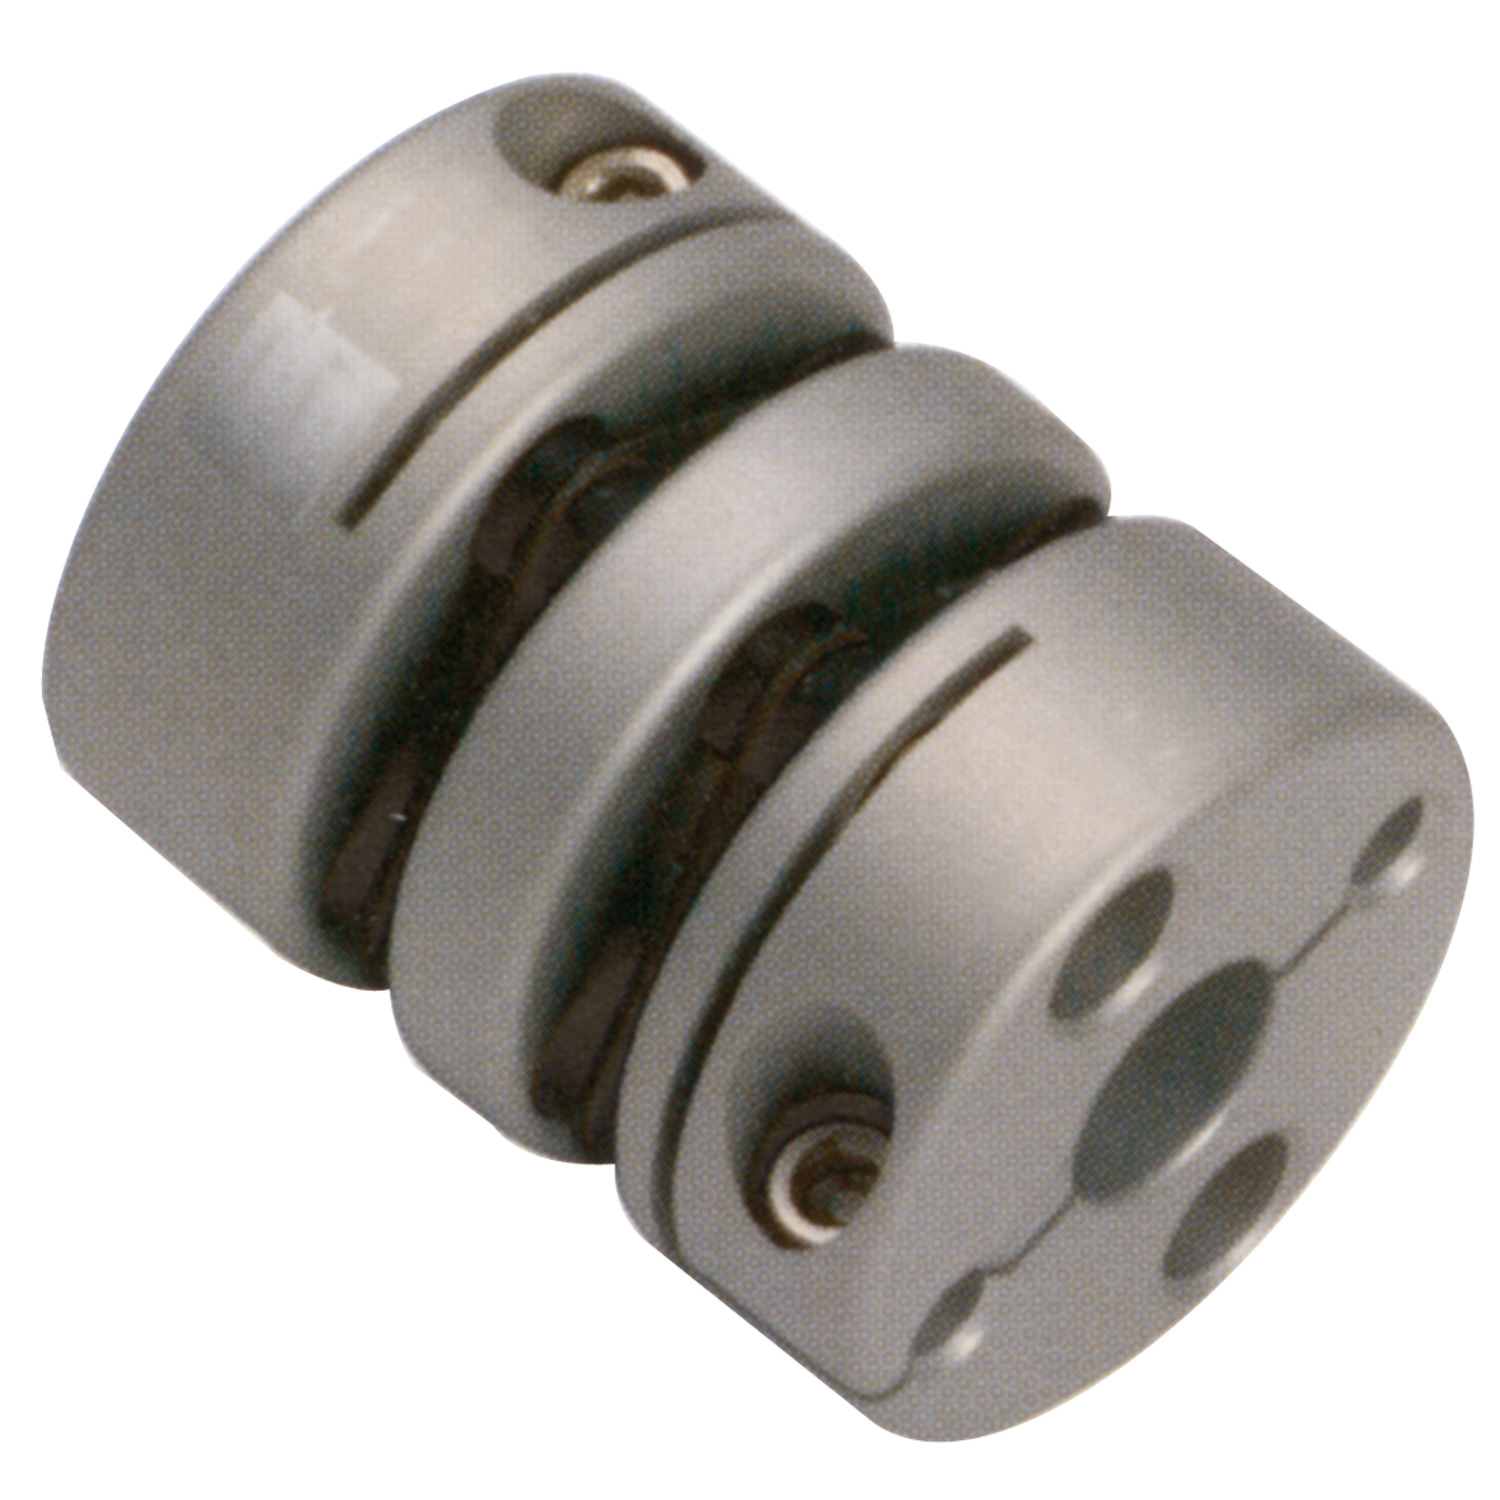 Product R3066.1, Double Disk Coupling - Aluminium clamping type, long type. / 